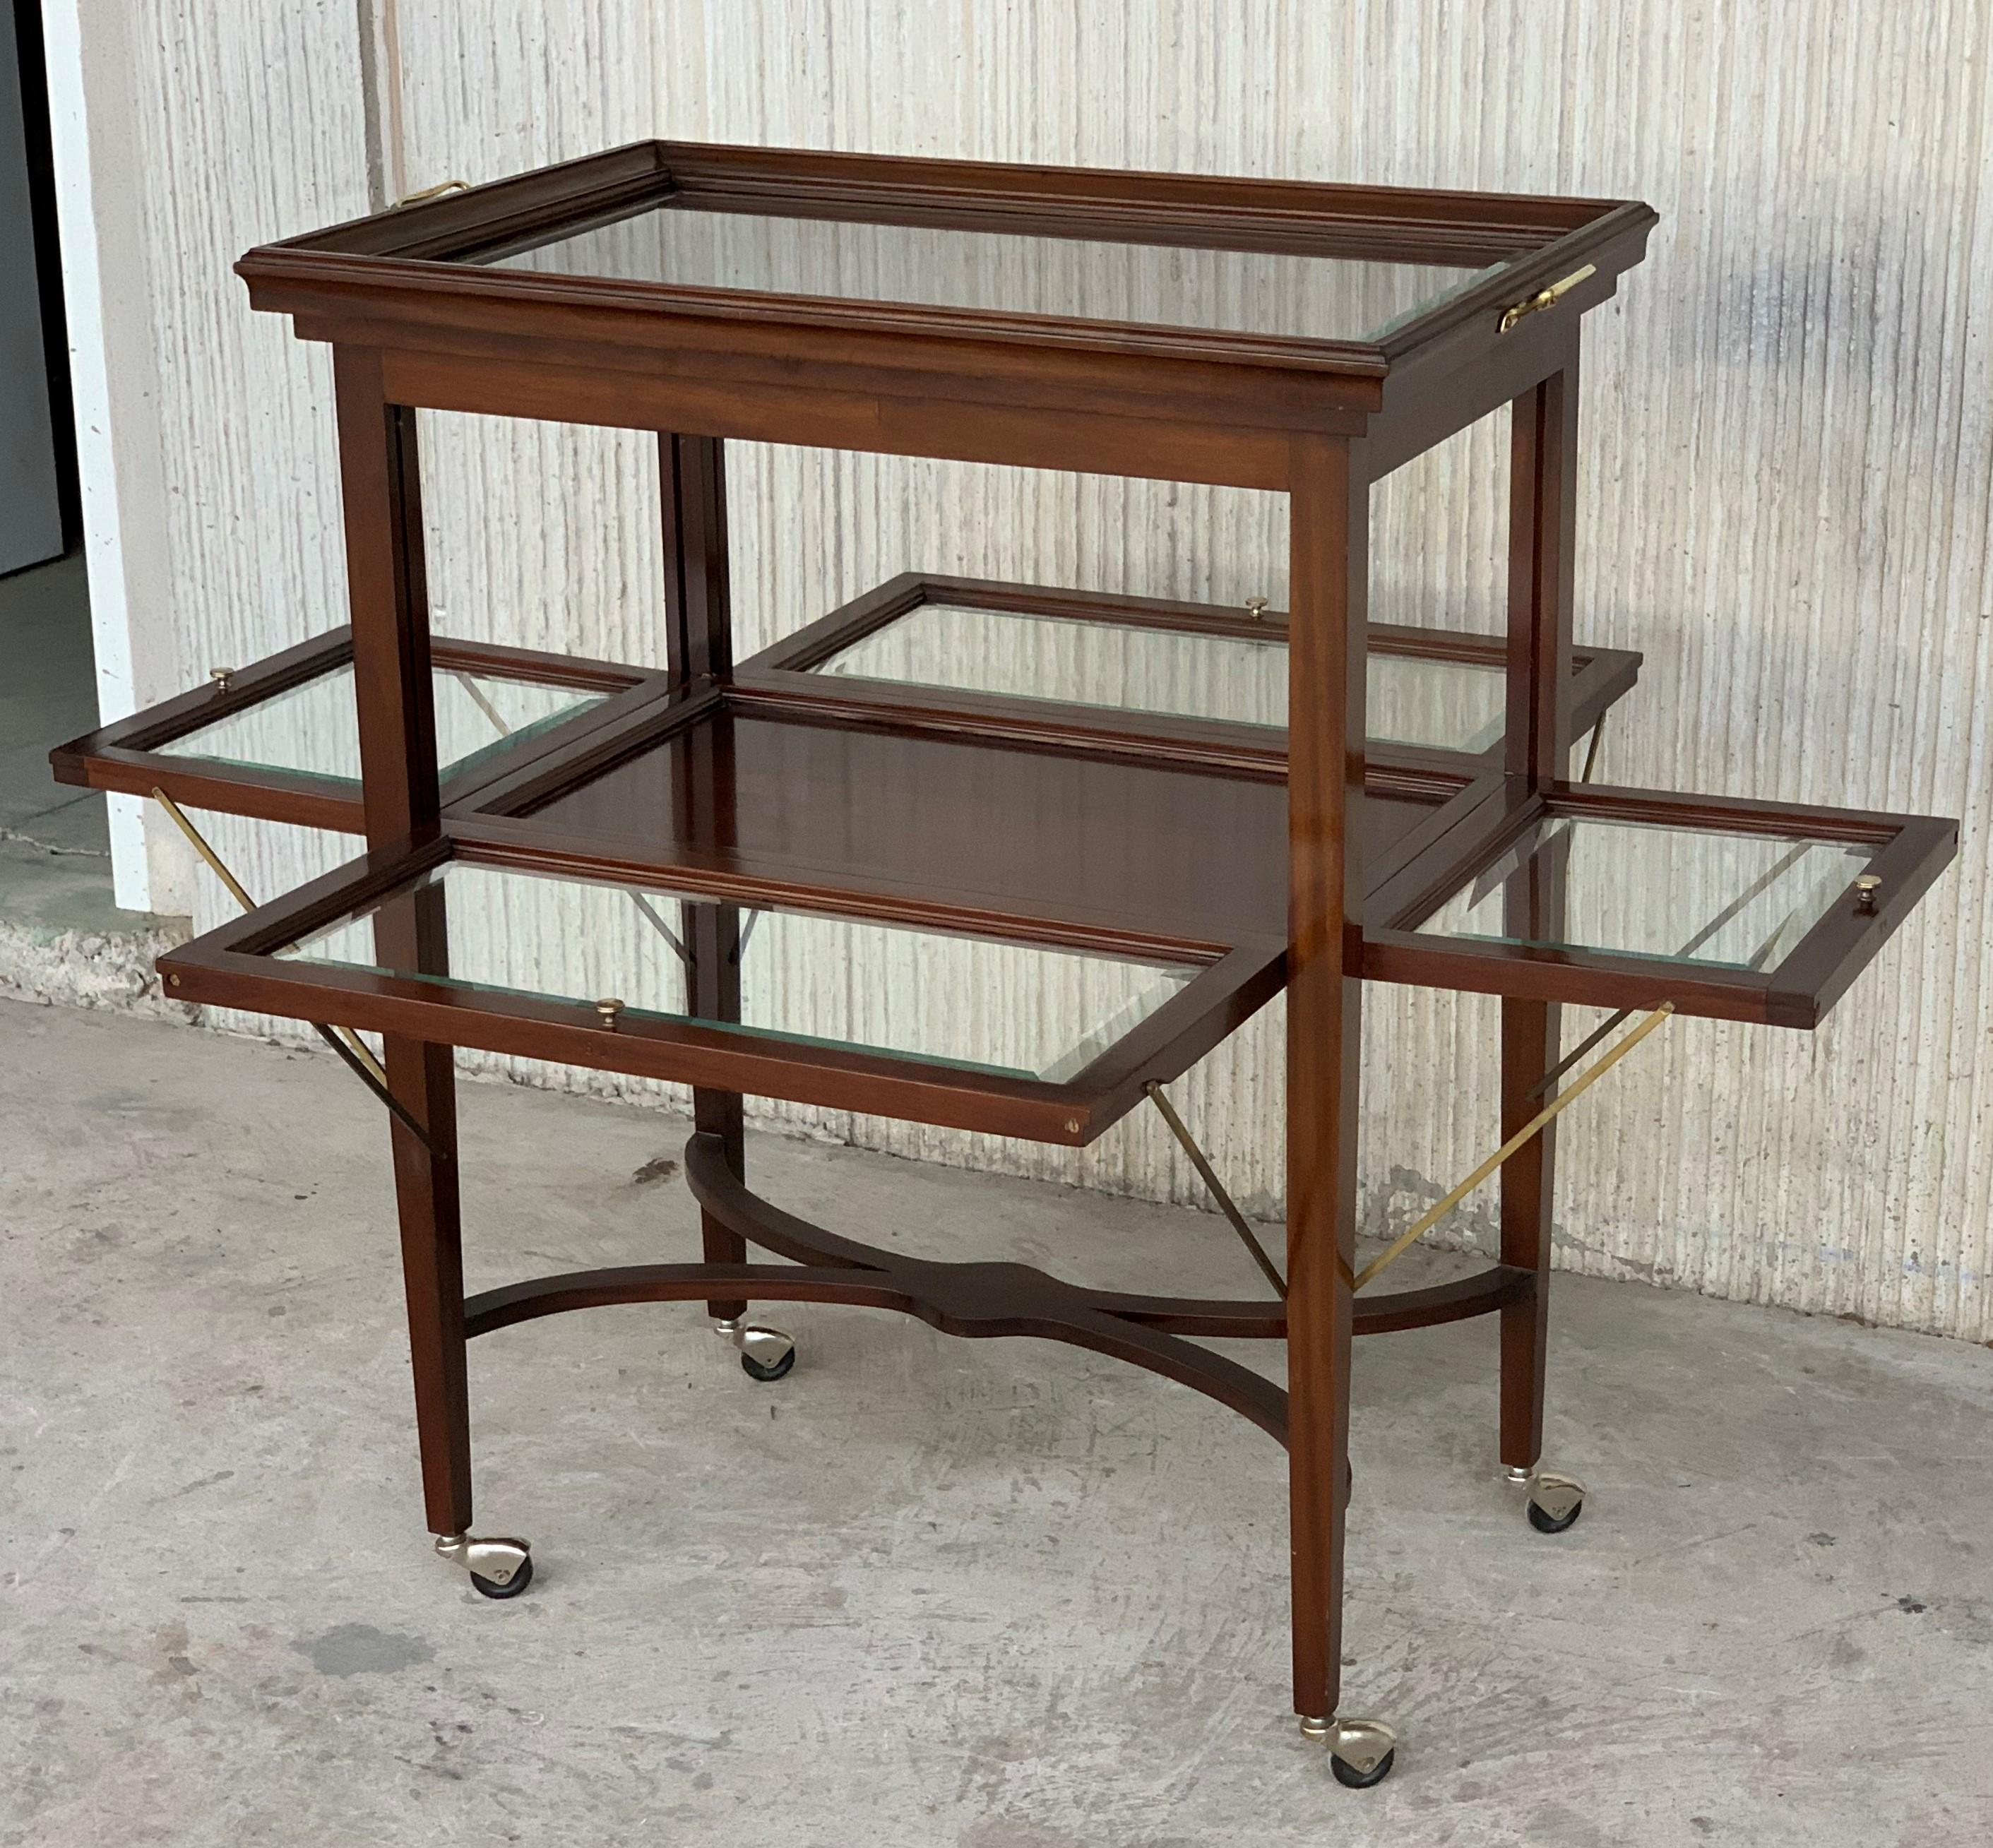 A vintage neoclassical convertible mahogany tea table, French, circa 1920. Square tapered legs in mahogany, glass tray tabletop and shelves, all with delicate bands of brass inlay for subtle decoration. The removable tray has scalloped edges and a